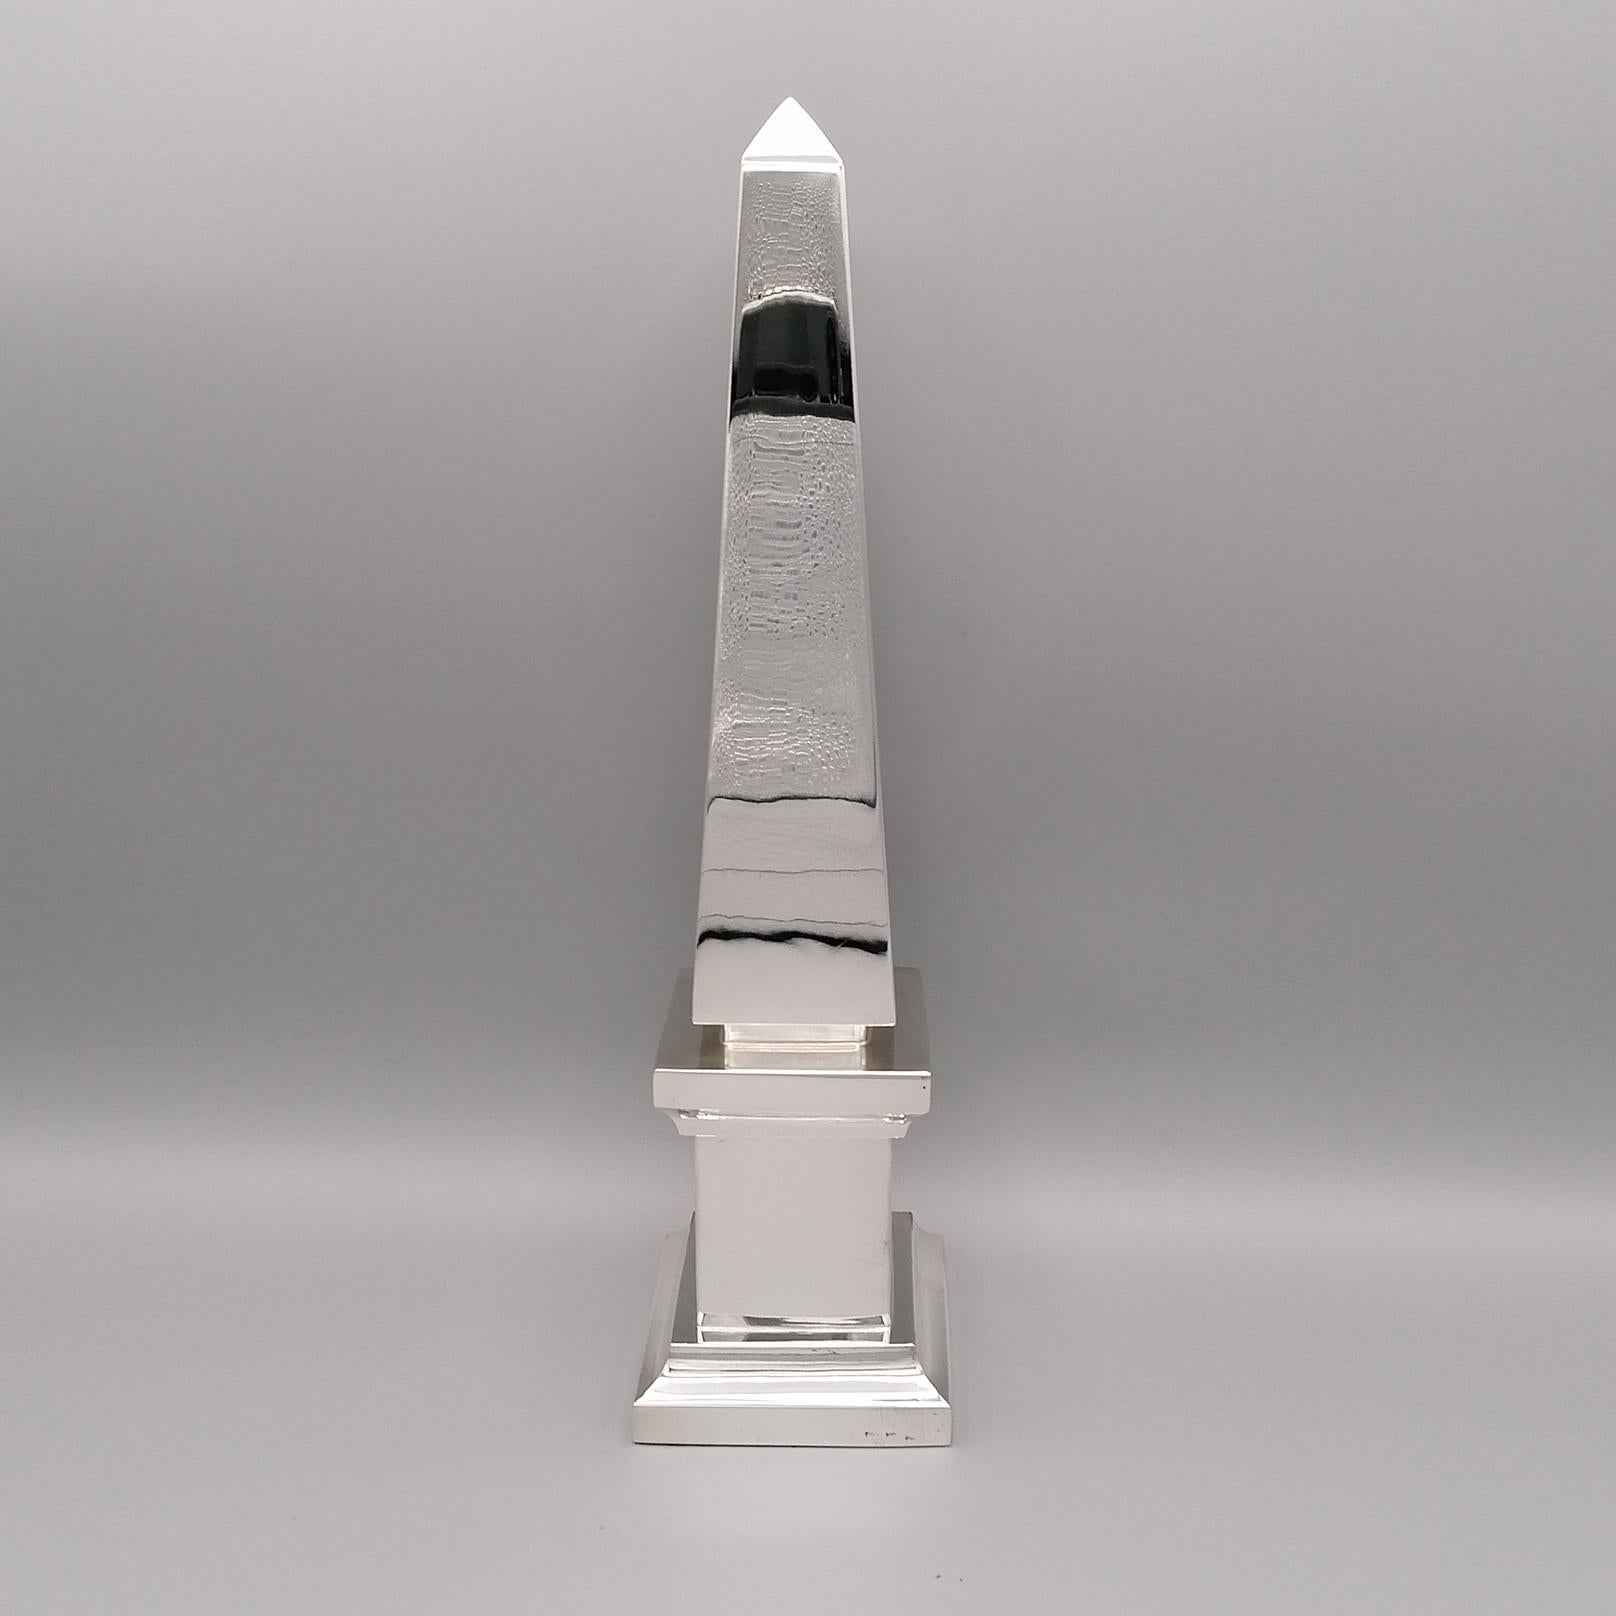 Solid sterling silver obelisk.
Made entirely by hand, the obelisk is completely smooth fixed on a square base of different sizes and sections.